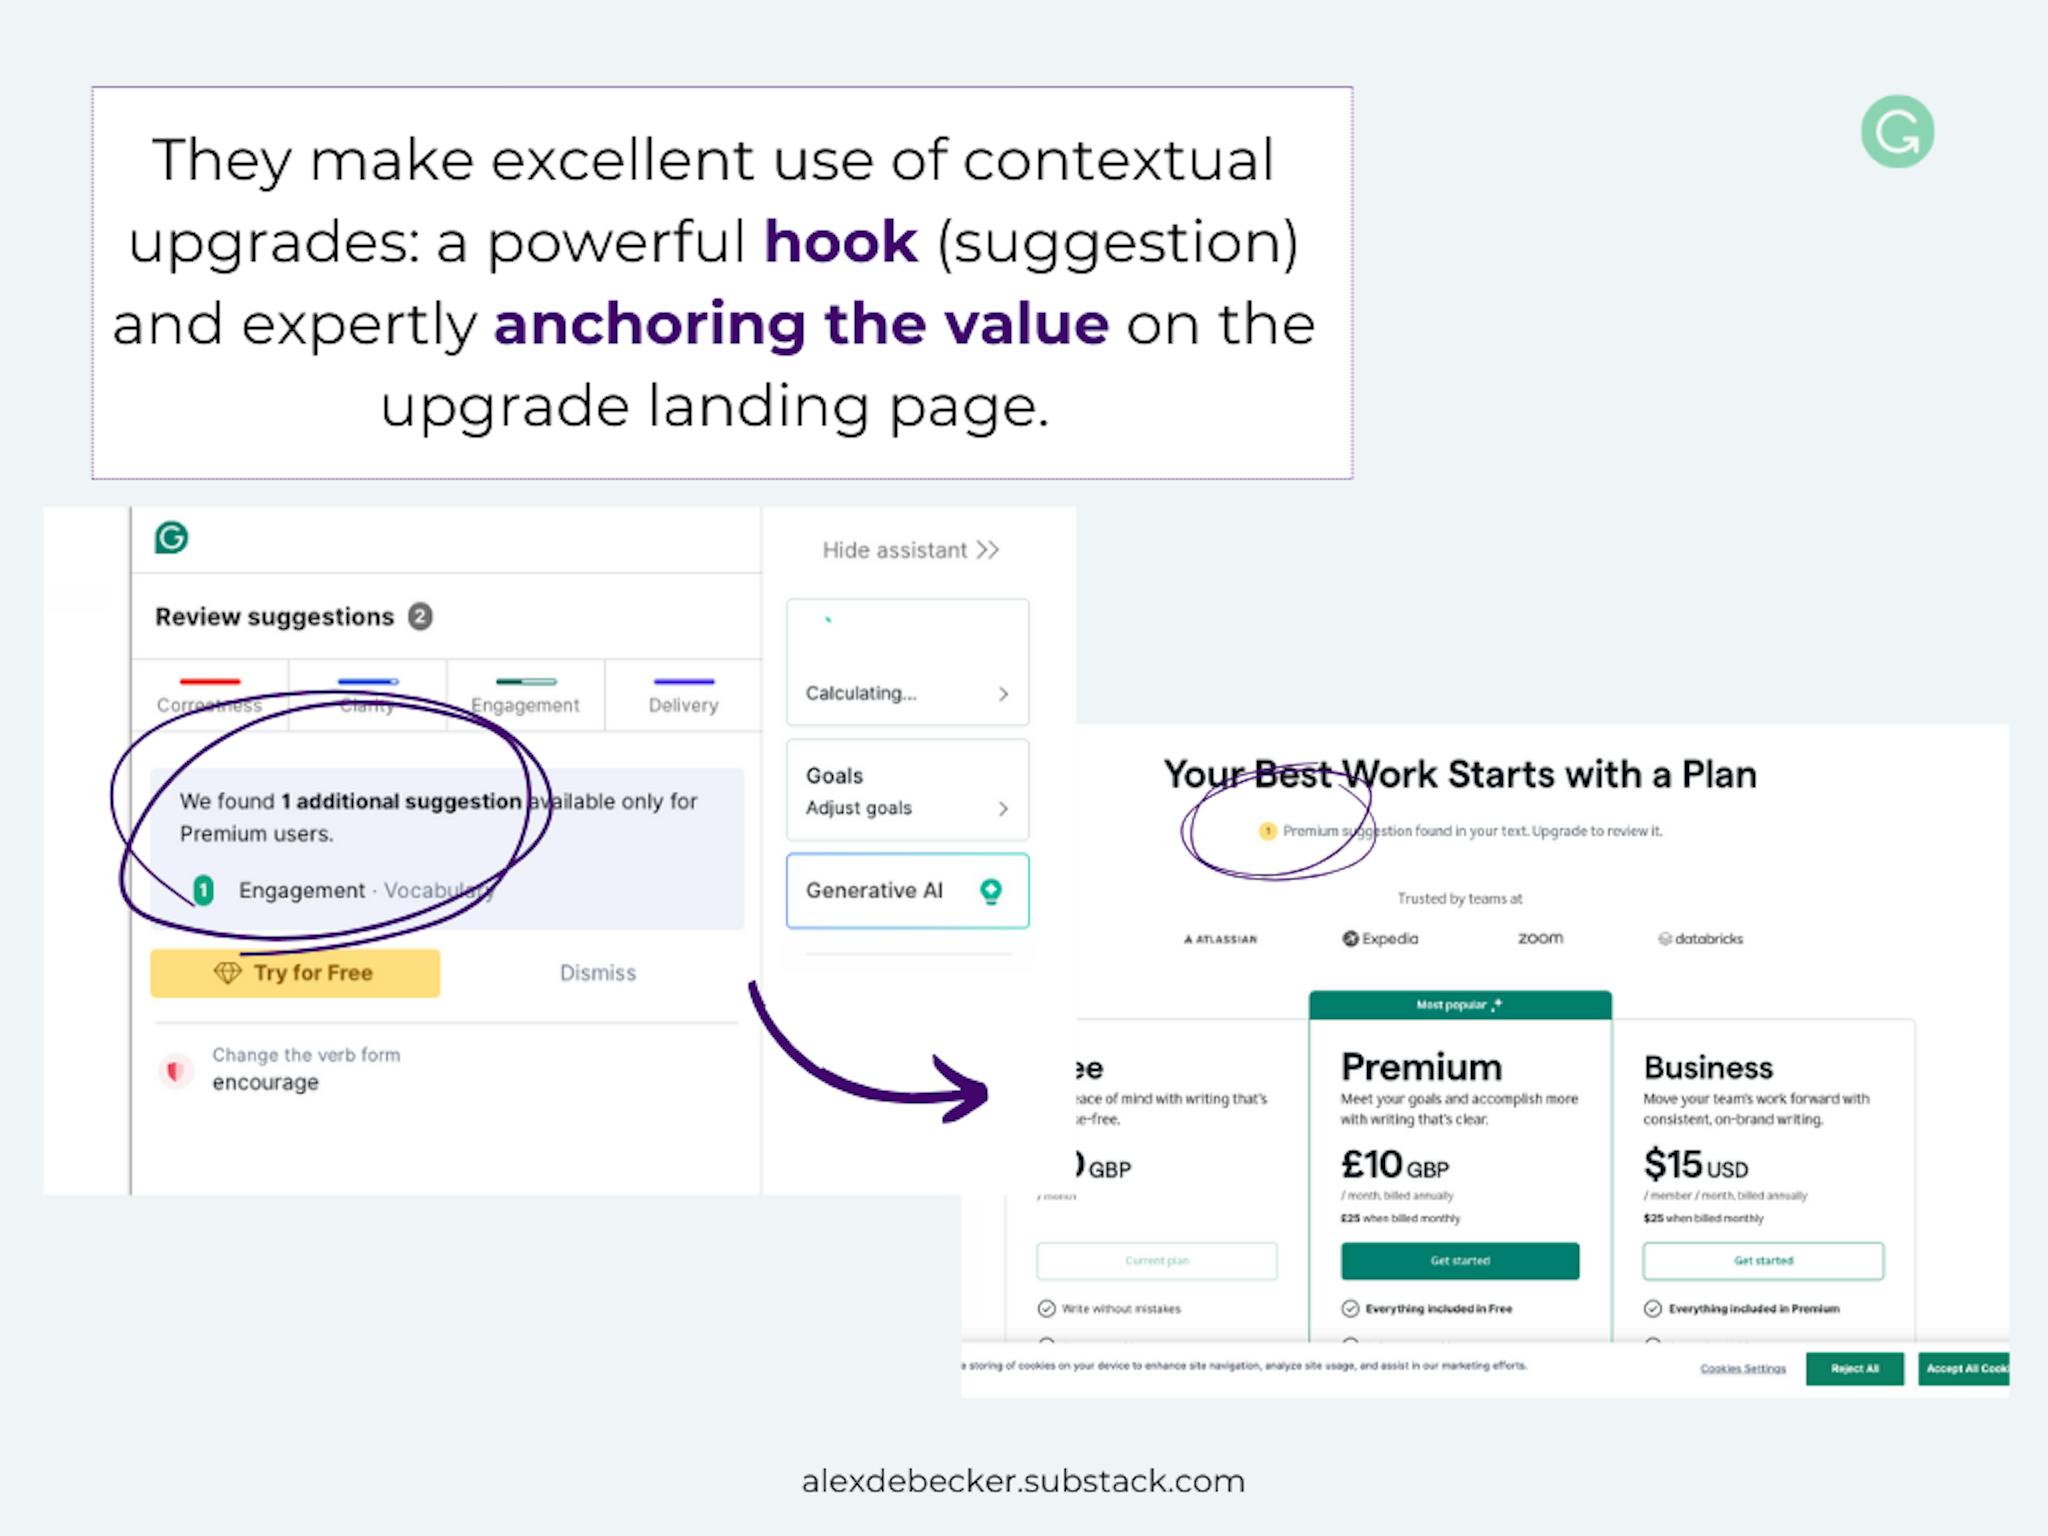 Grammarly hook & anchor the value throughout the upgrade process